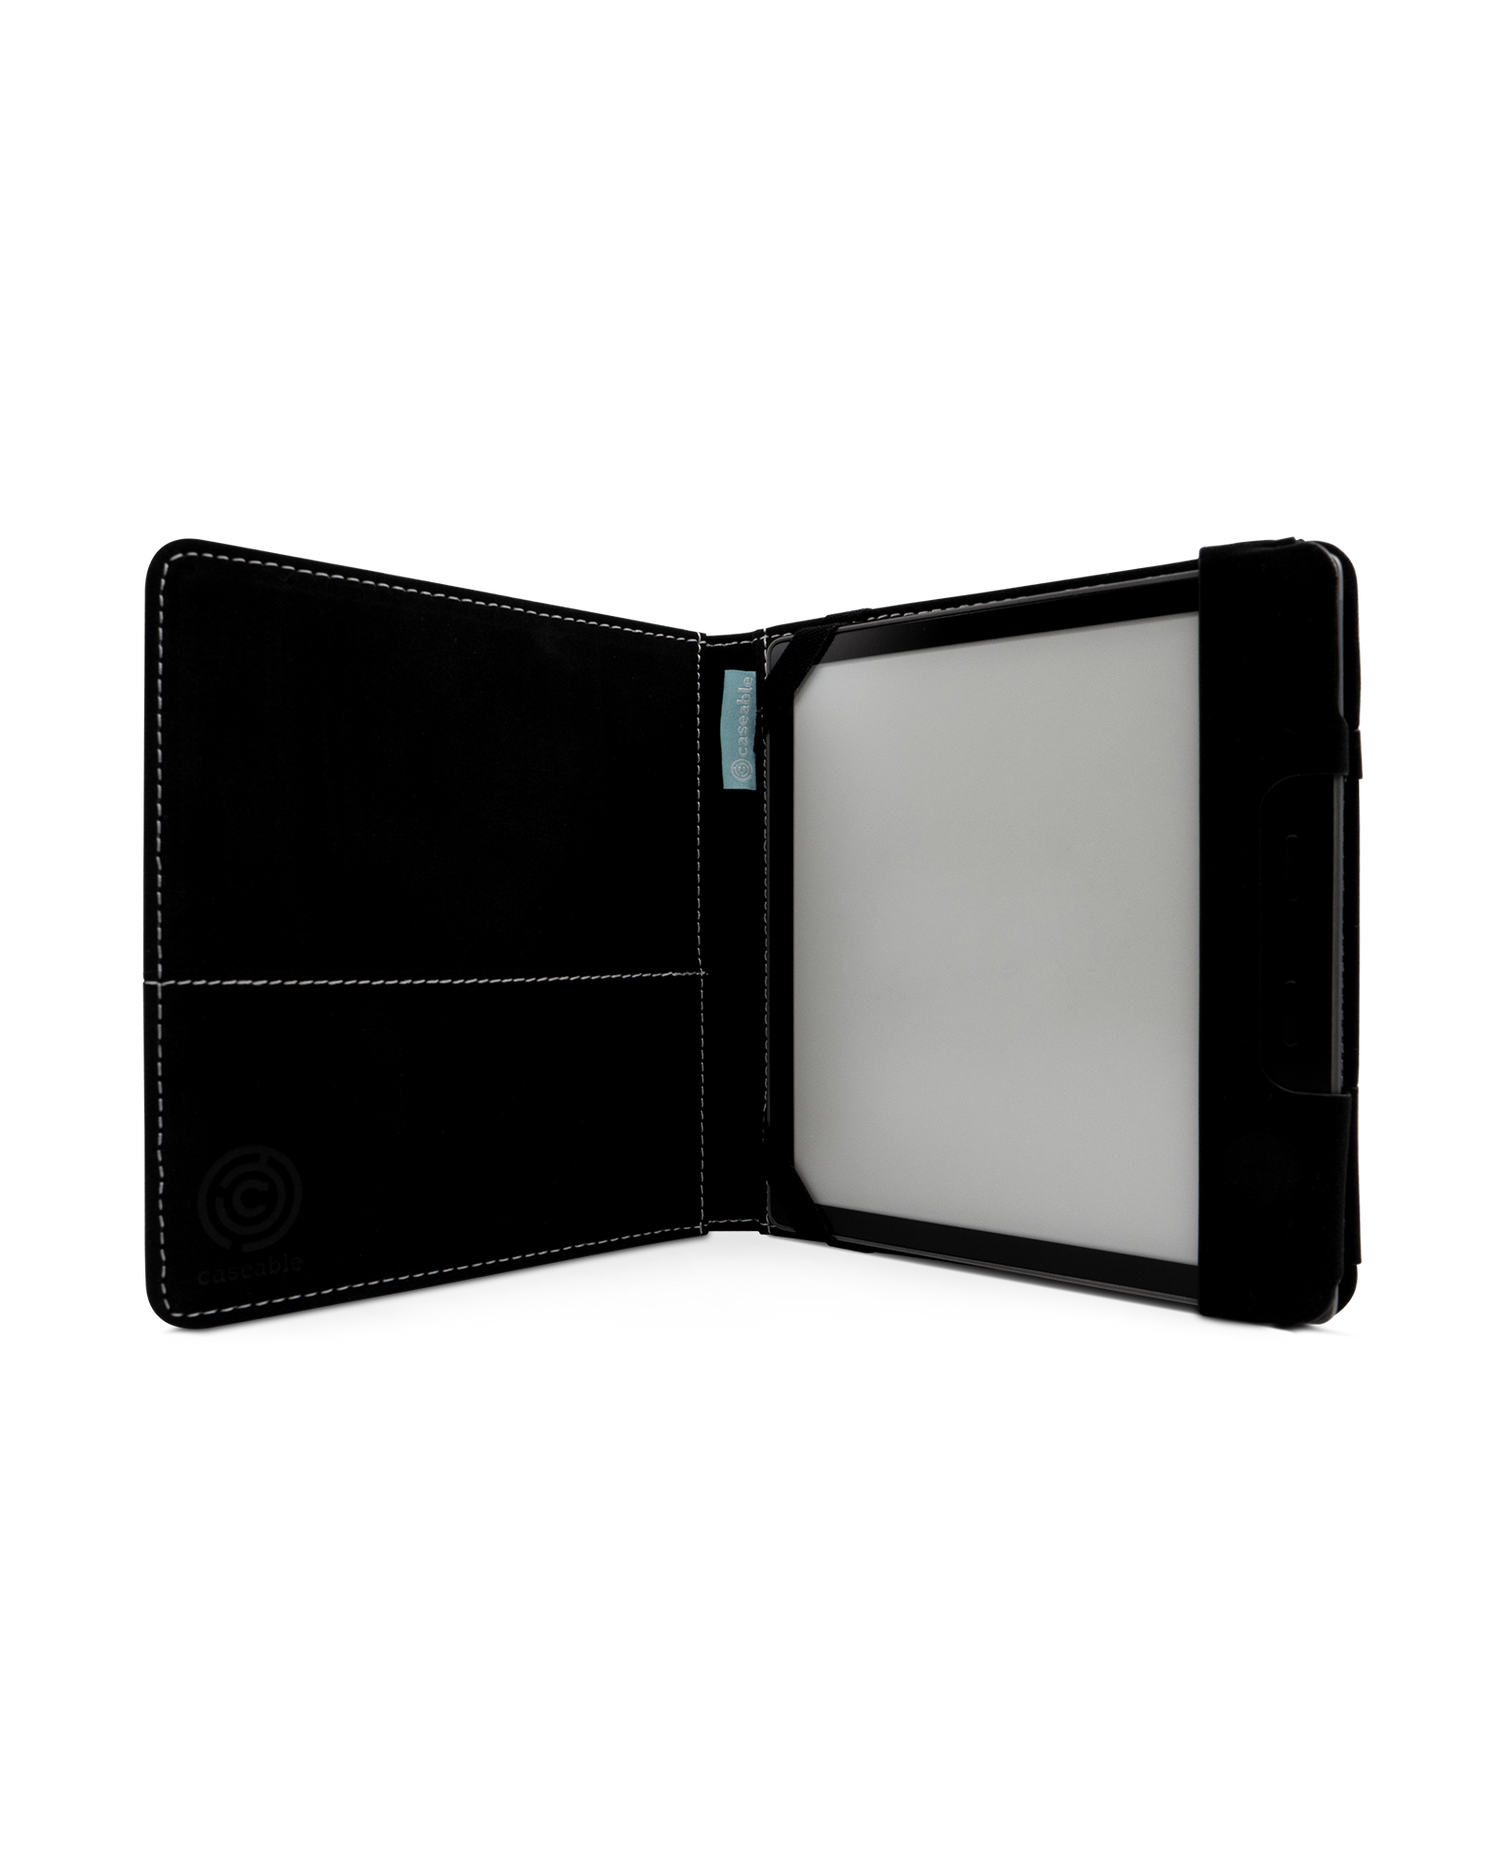 Mystical Pattern eReader Case for tolino vision 6: Opened interior view